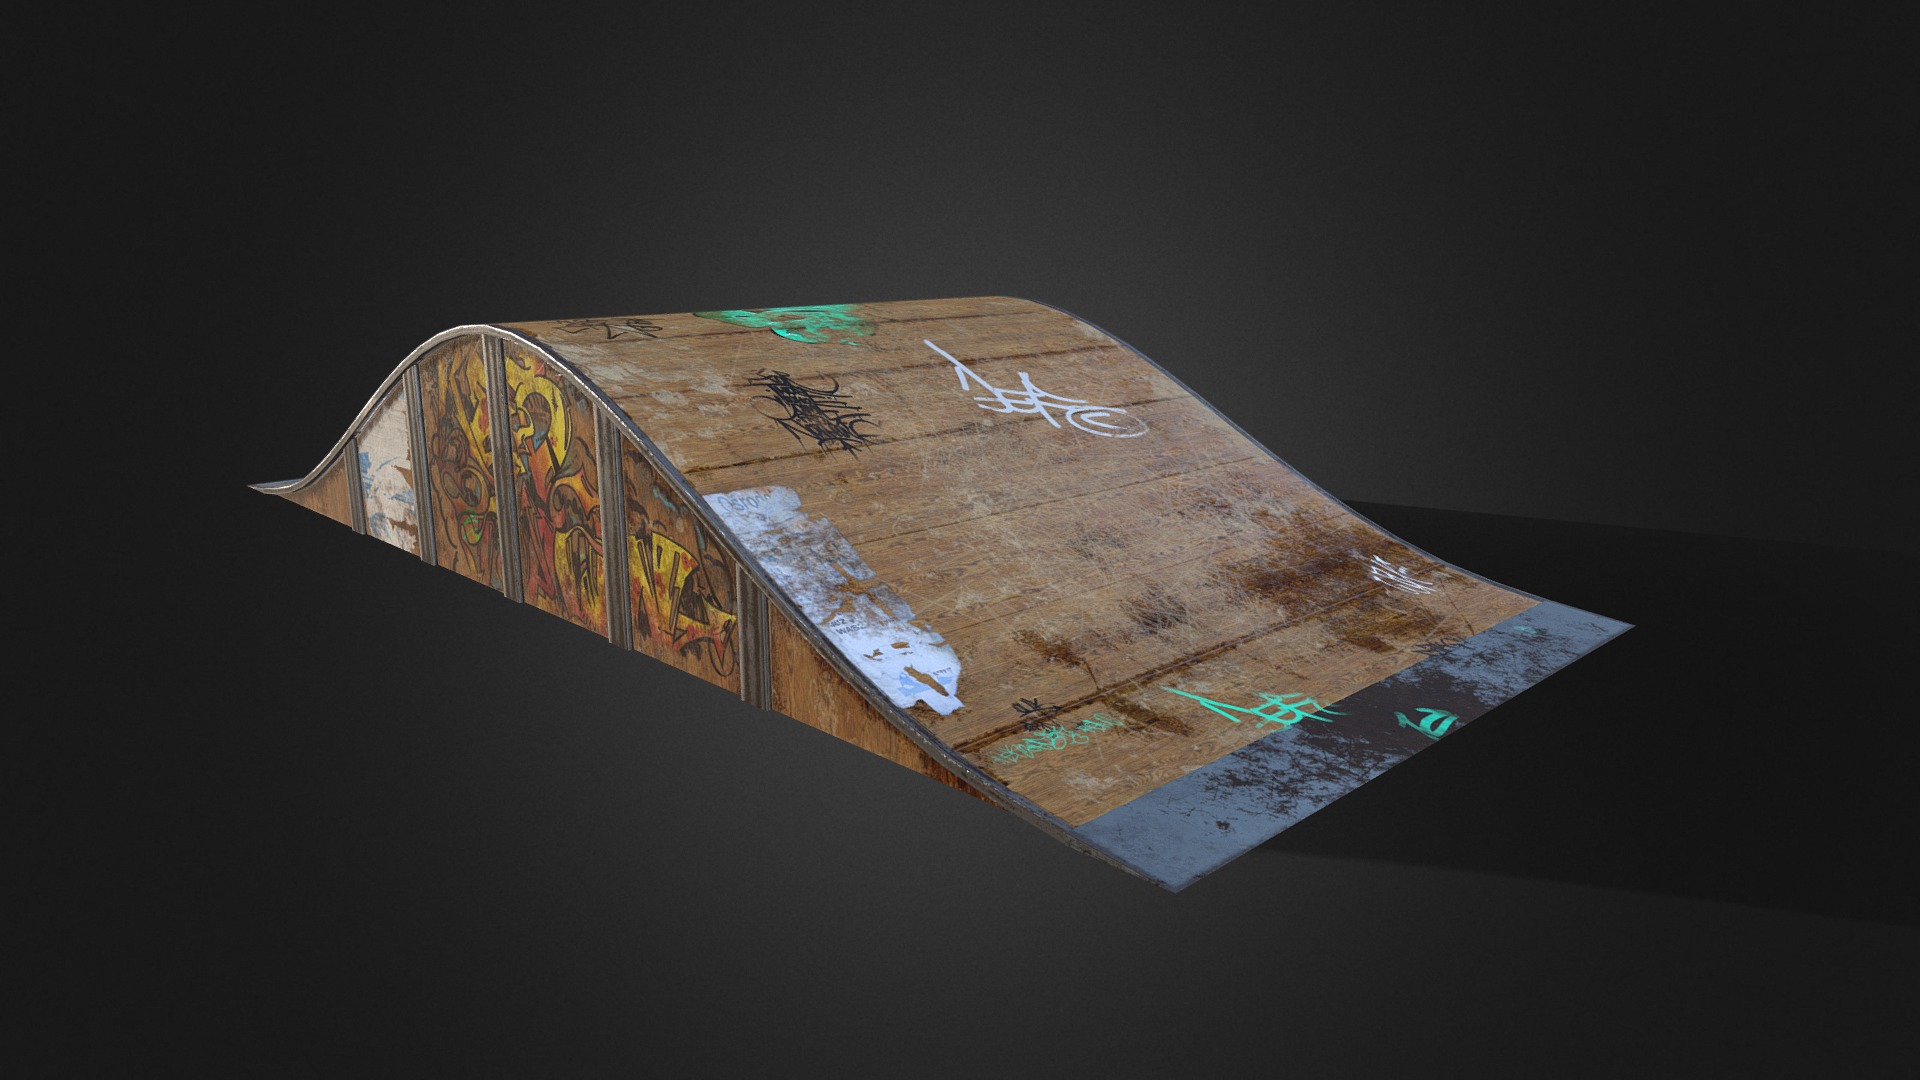 3D model Skate Ramp - This is a 3D model of the Skate Ramp. The 3D model is about a rectangular object with a design on it.